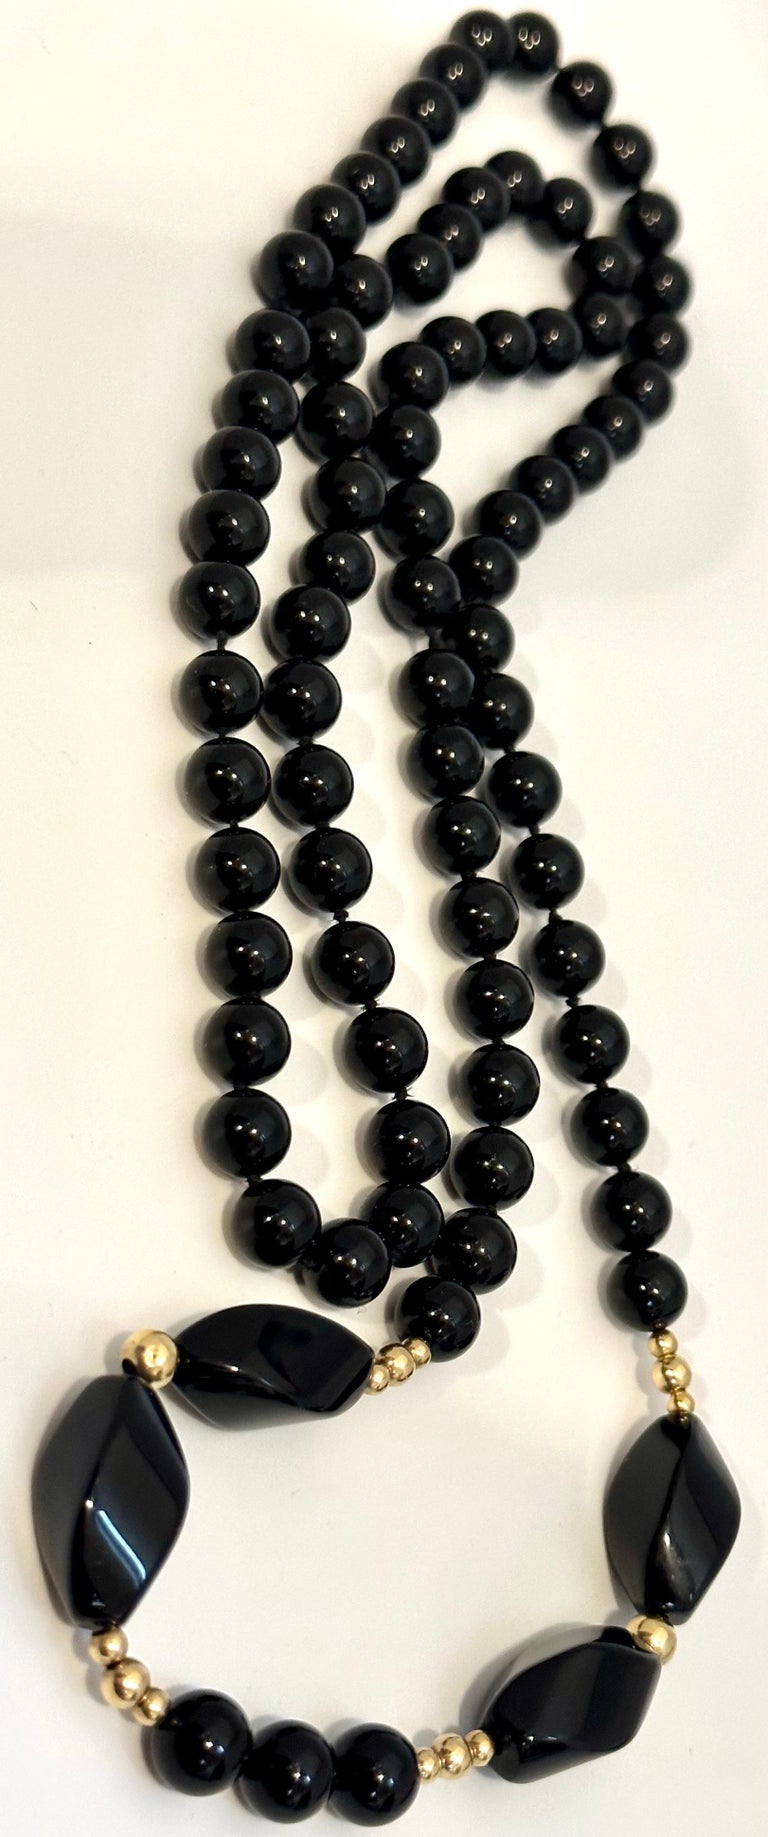 Round 8 MM Bead Black Onyx and 14 Karat Gold Bead Necklace 32 Inch Long ...